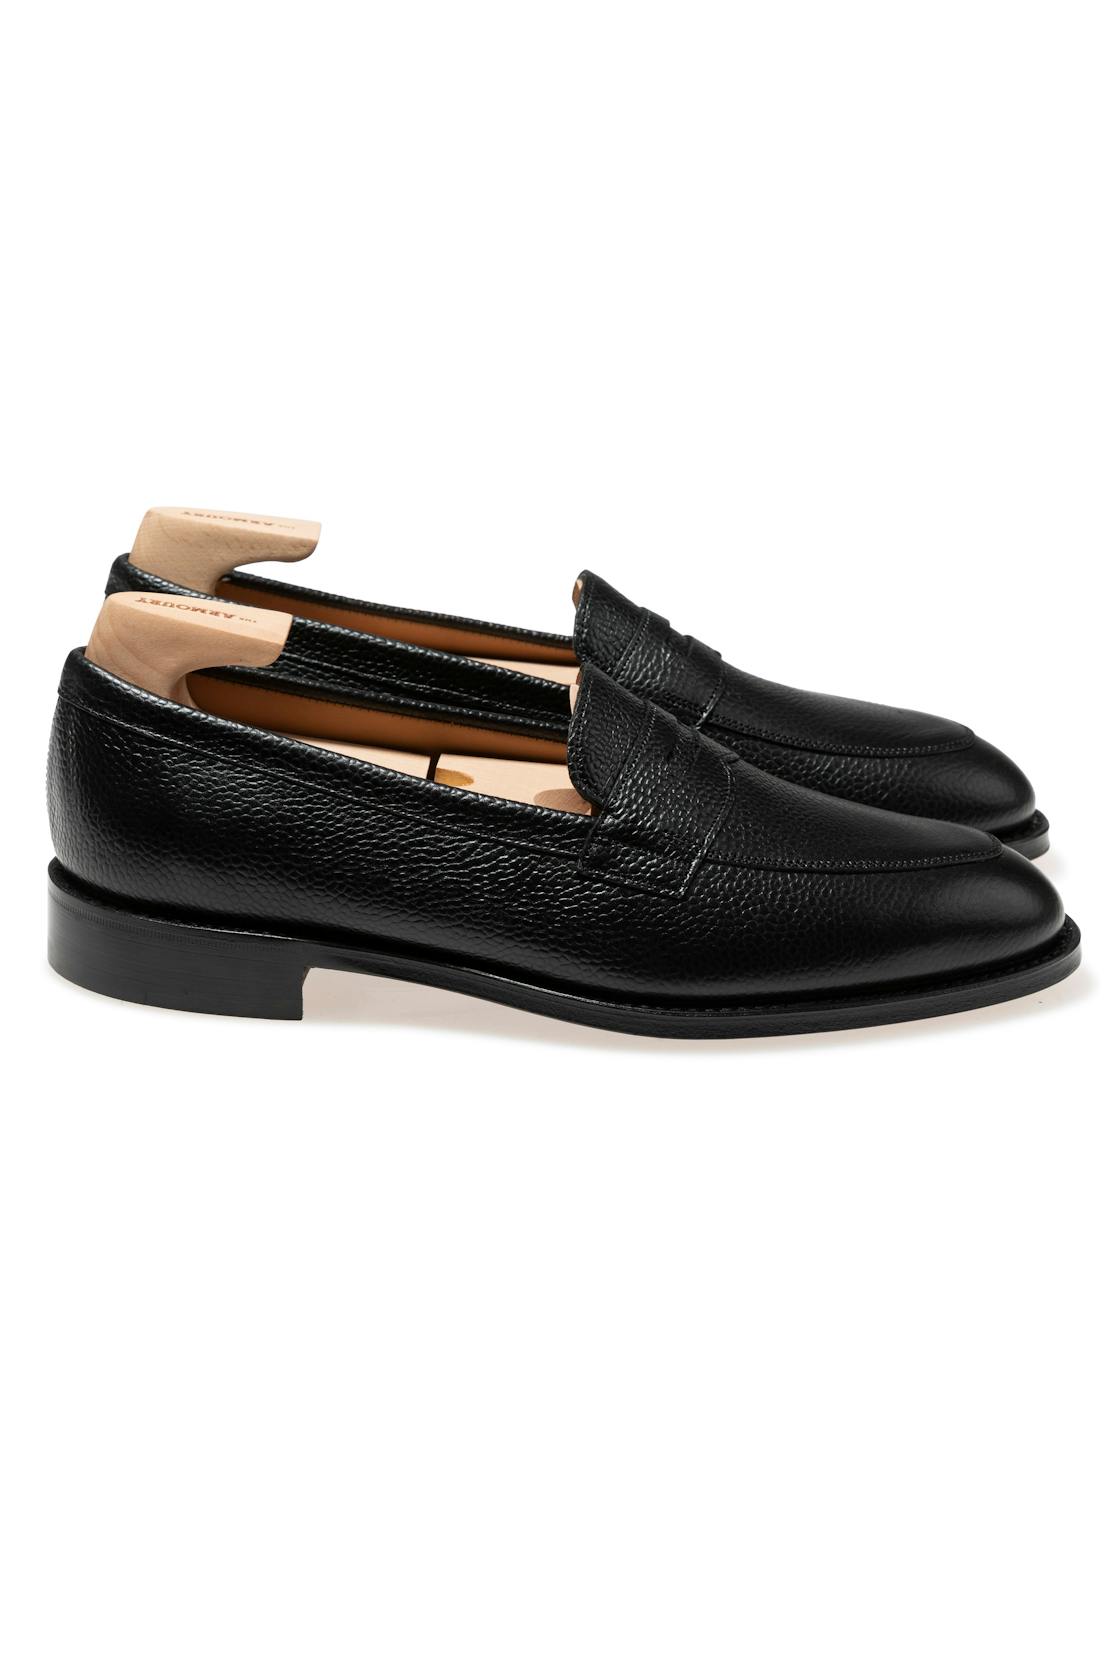 The Armoury Duane II Black Grained Calf Penny Loafers *factory seconds*